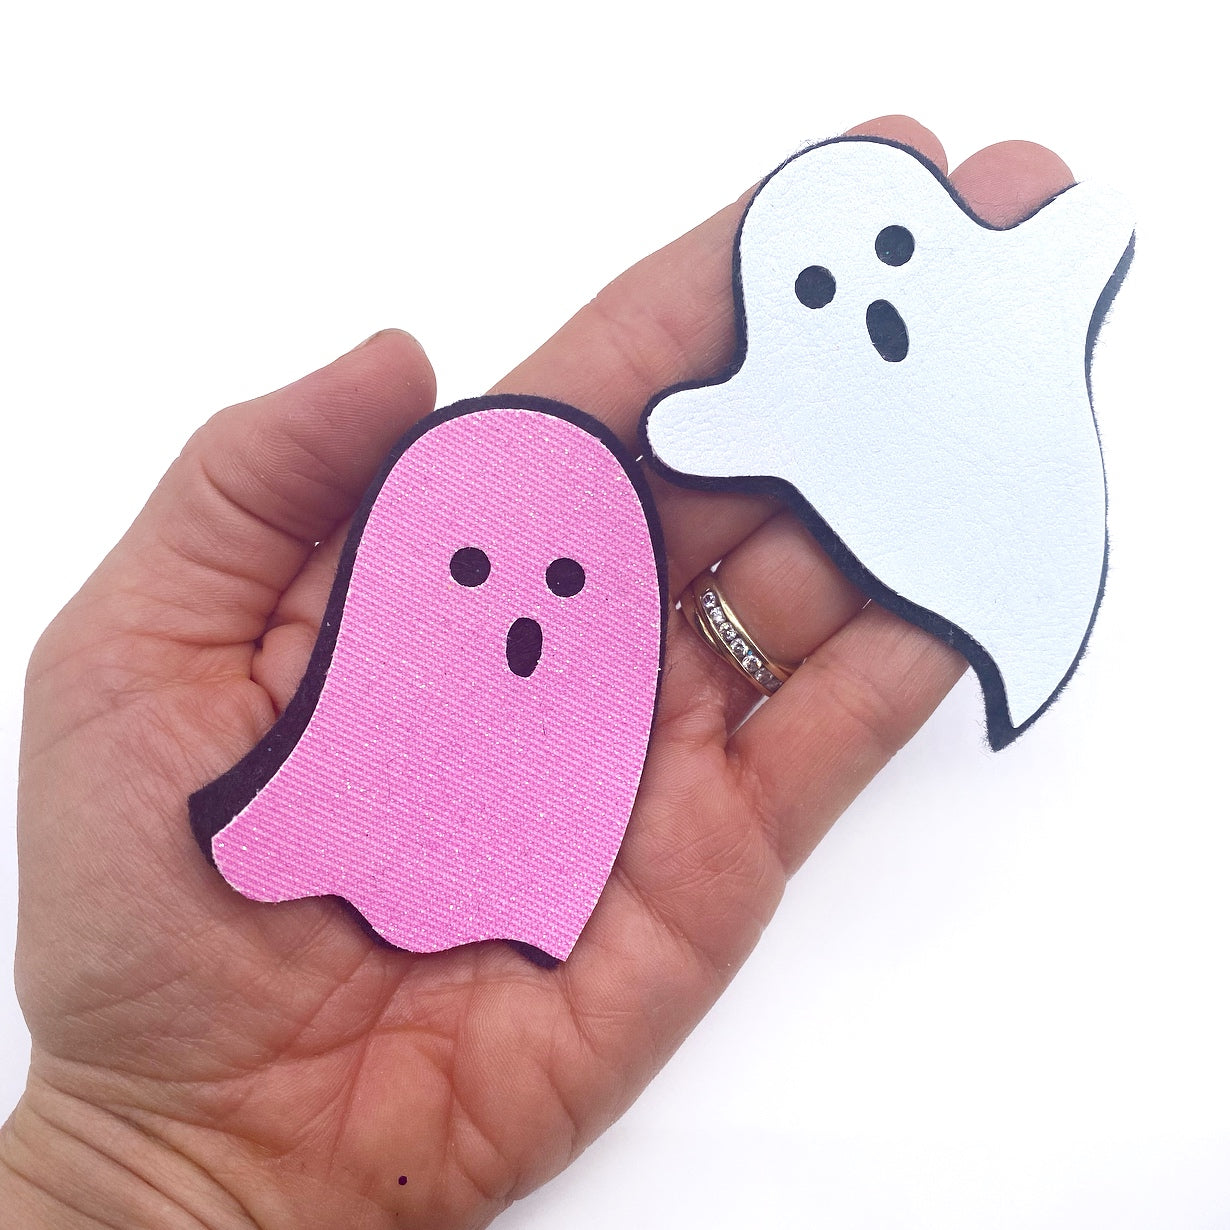 Spooky Ghoul Gang Ghostie Hair Clip Bow Template SVG/PDF